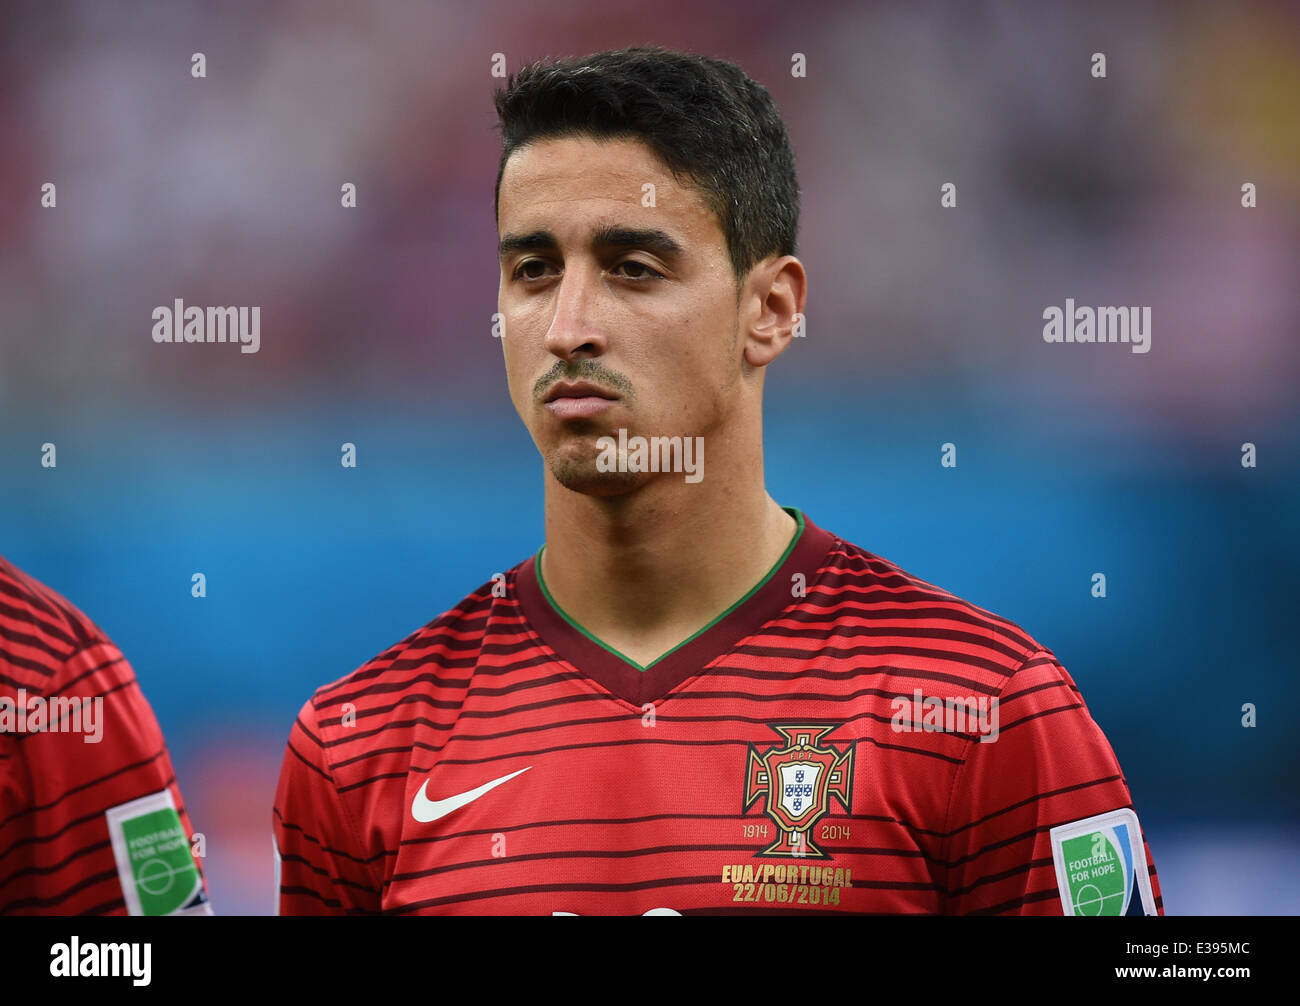 Manaus, Brazil. 22nd June, 2014. Andre Almeida of Portugal seen the national anthem prior to the FIFA World Cup 2014 group G preliminary round match between the USA and Portugal at the Arena Amazonia Stadium in Manaus, Brazil, 22 June 2014. Photo: Marius Becker/dpa/Alamy Live News Stock Photo